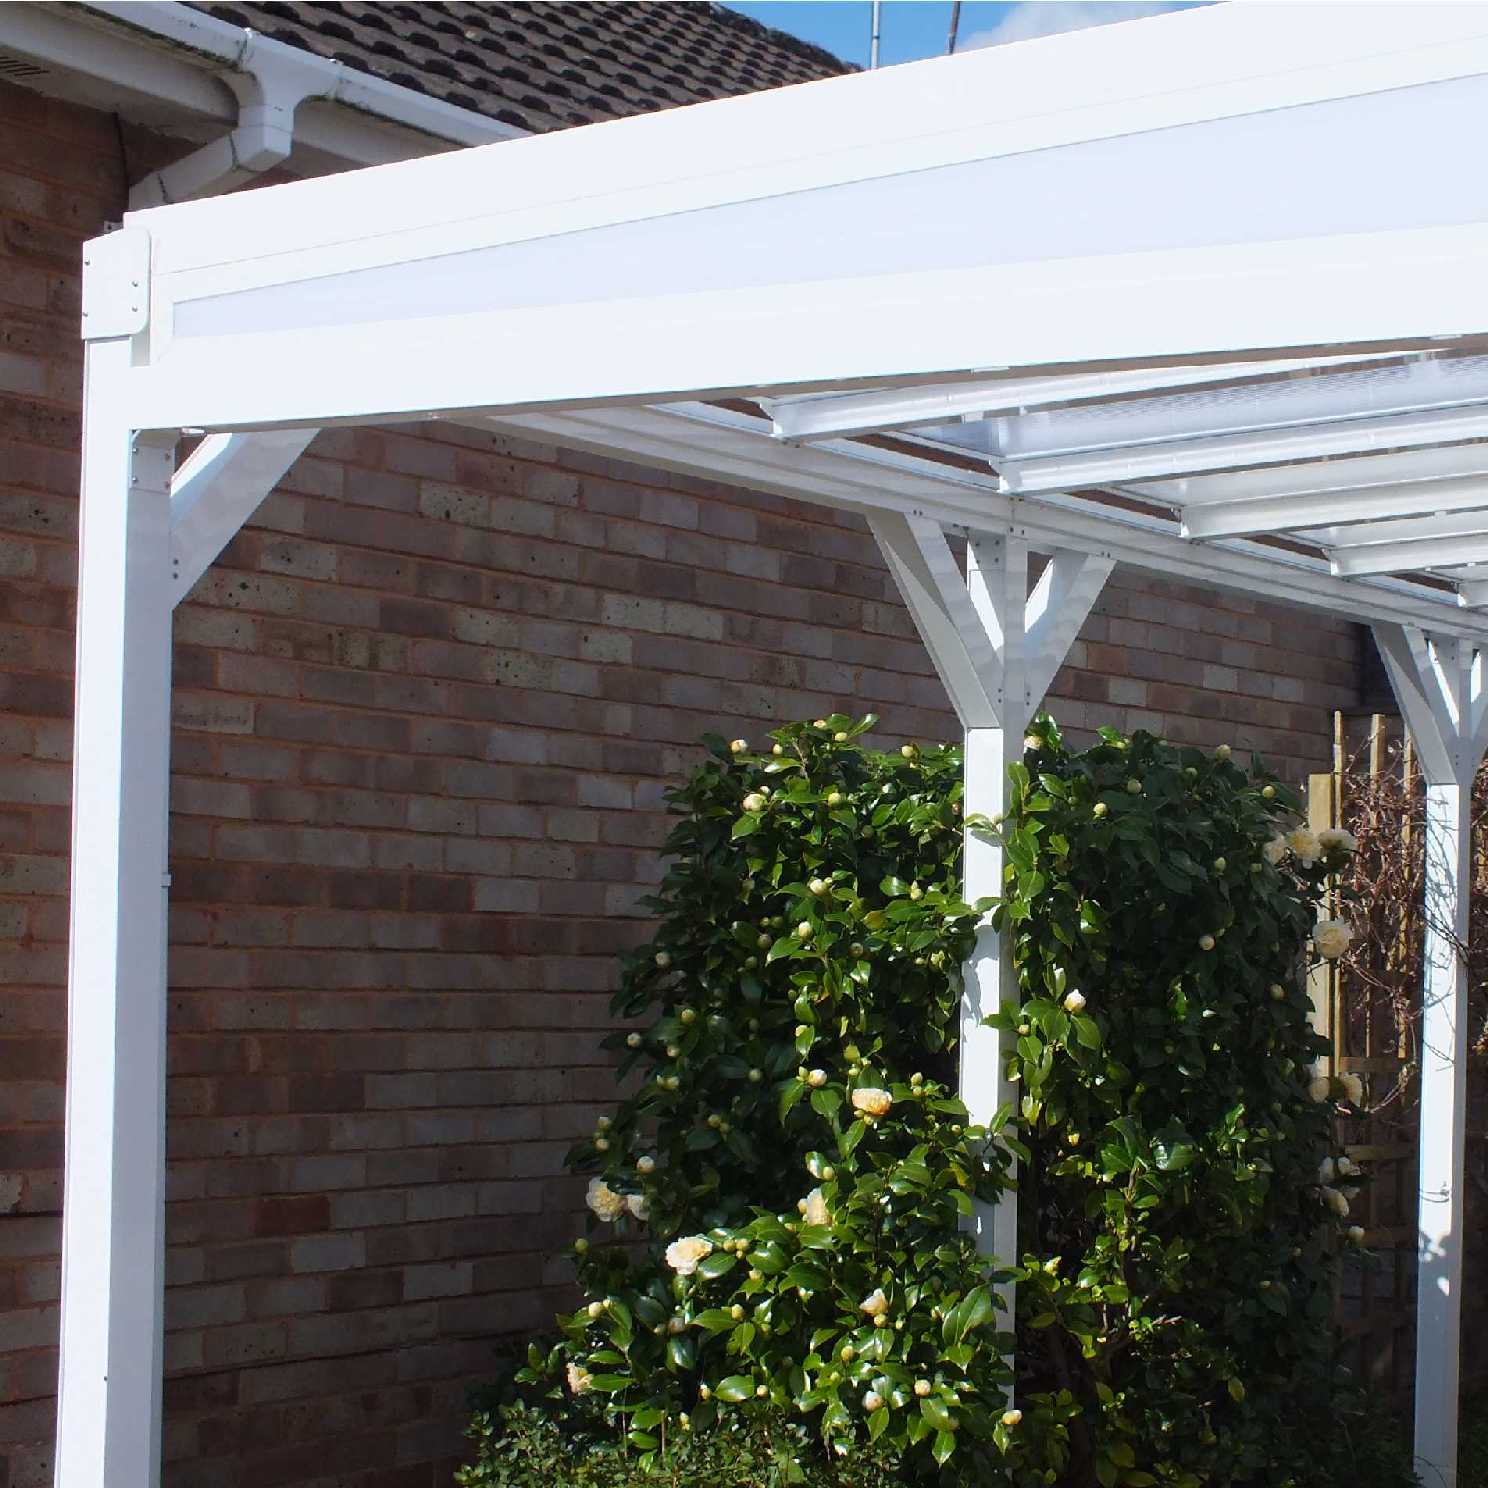 Omega Smart Lean-To Canopy, White with 16mm Polycarbonate Glazing - 3.1m (W) x 2.5m (P), (2) Supporting Posts from Omega Build